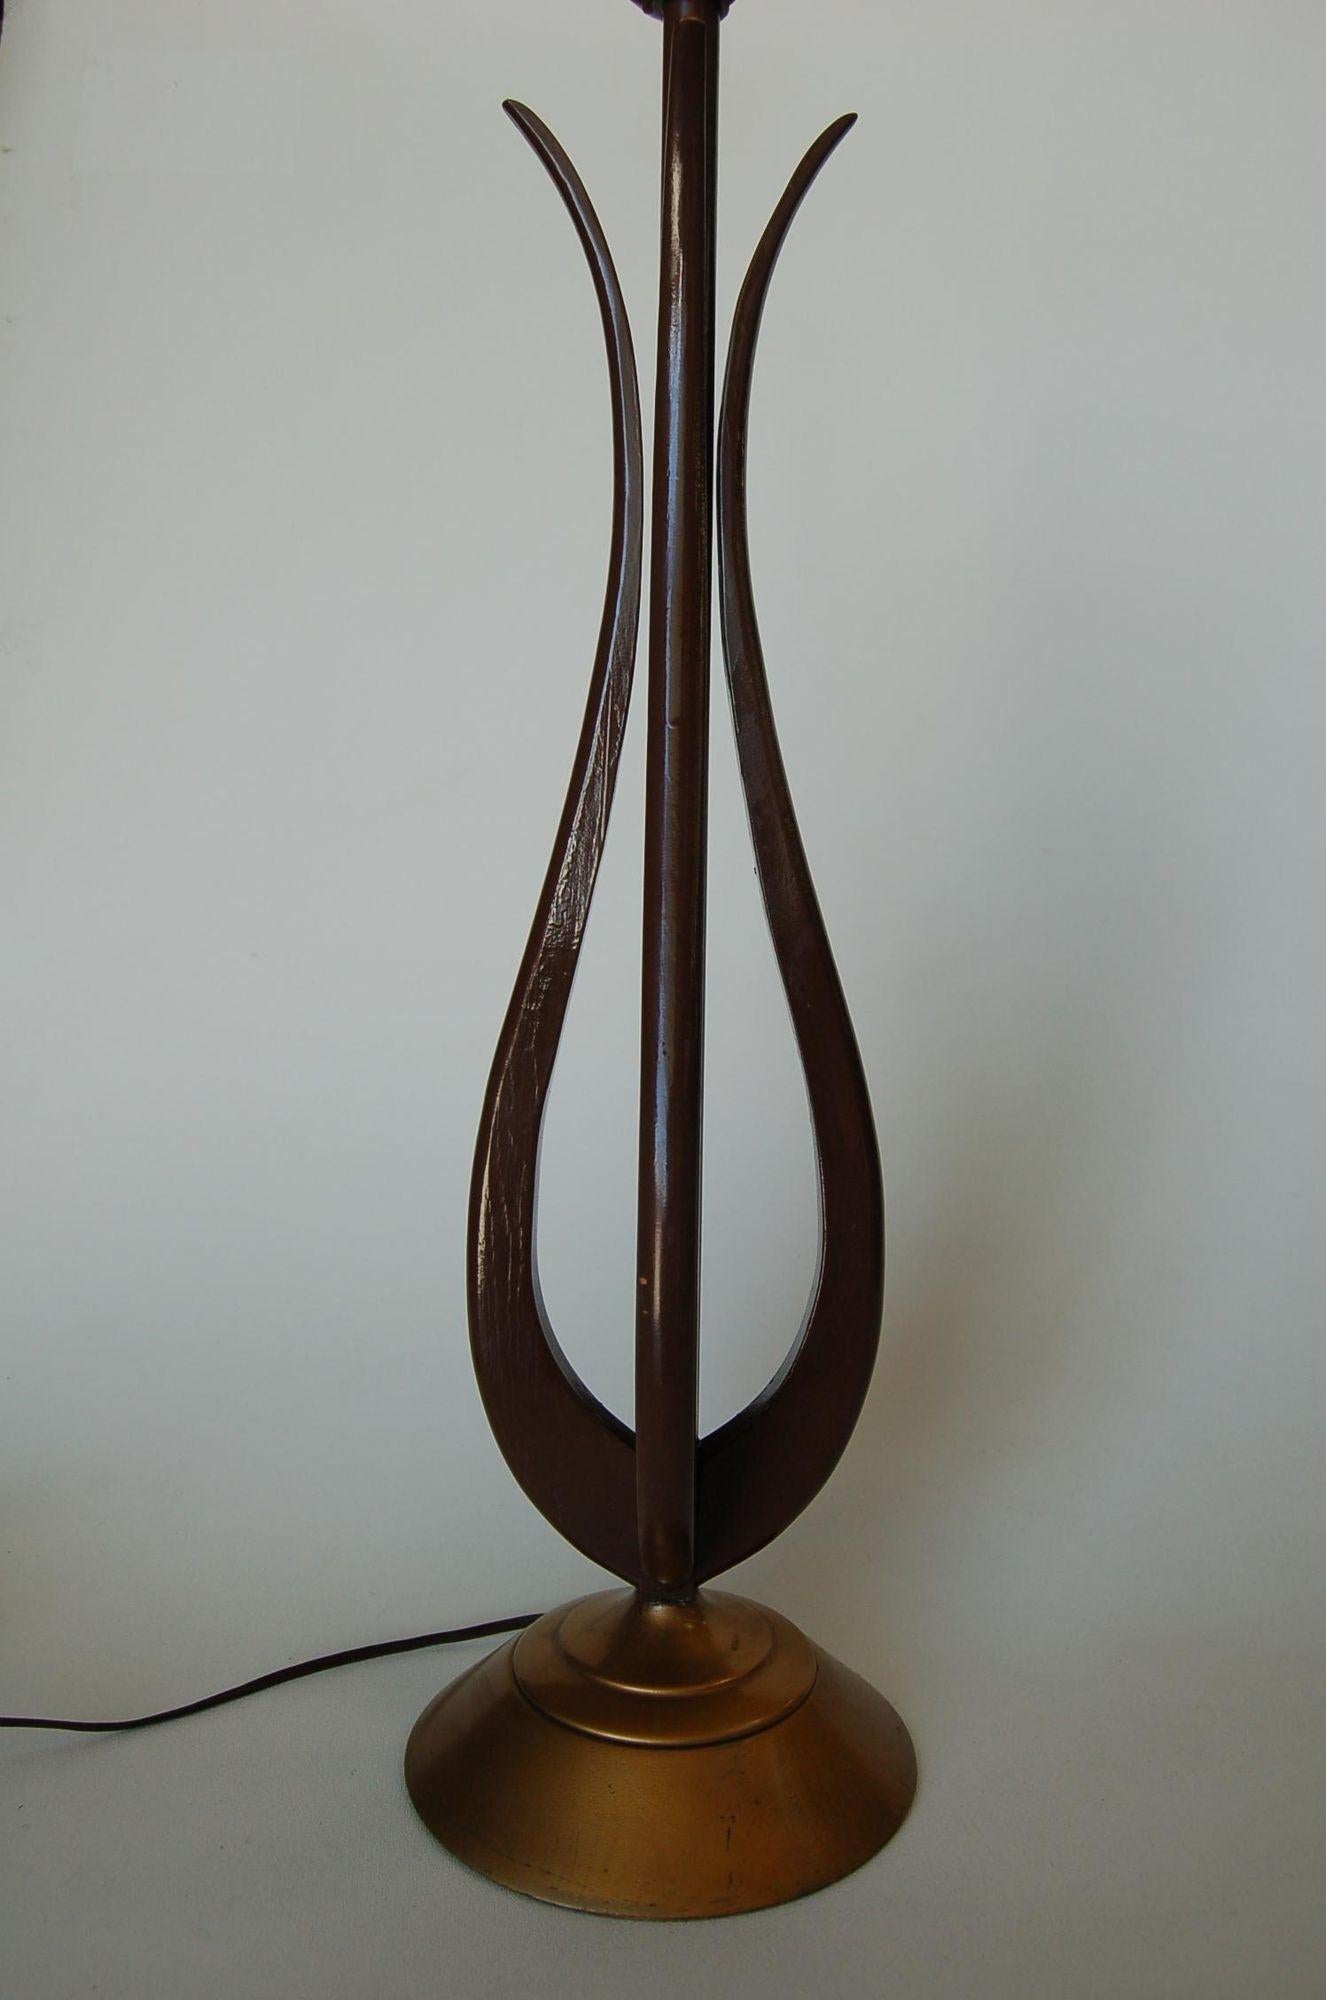 Wood Modernist Harp Shaped Sculptural Walnut and Brass Tone Table Lamp, Pair For Sale